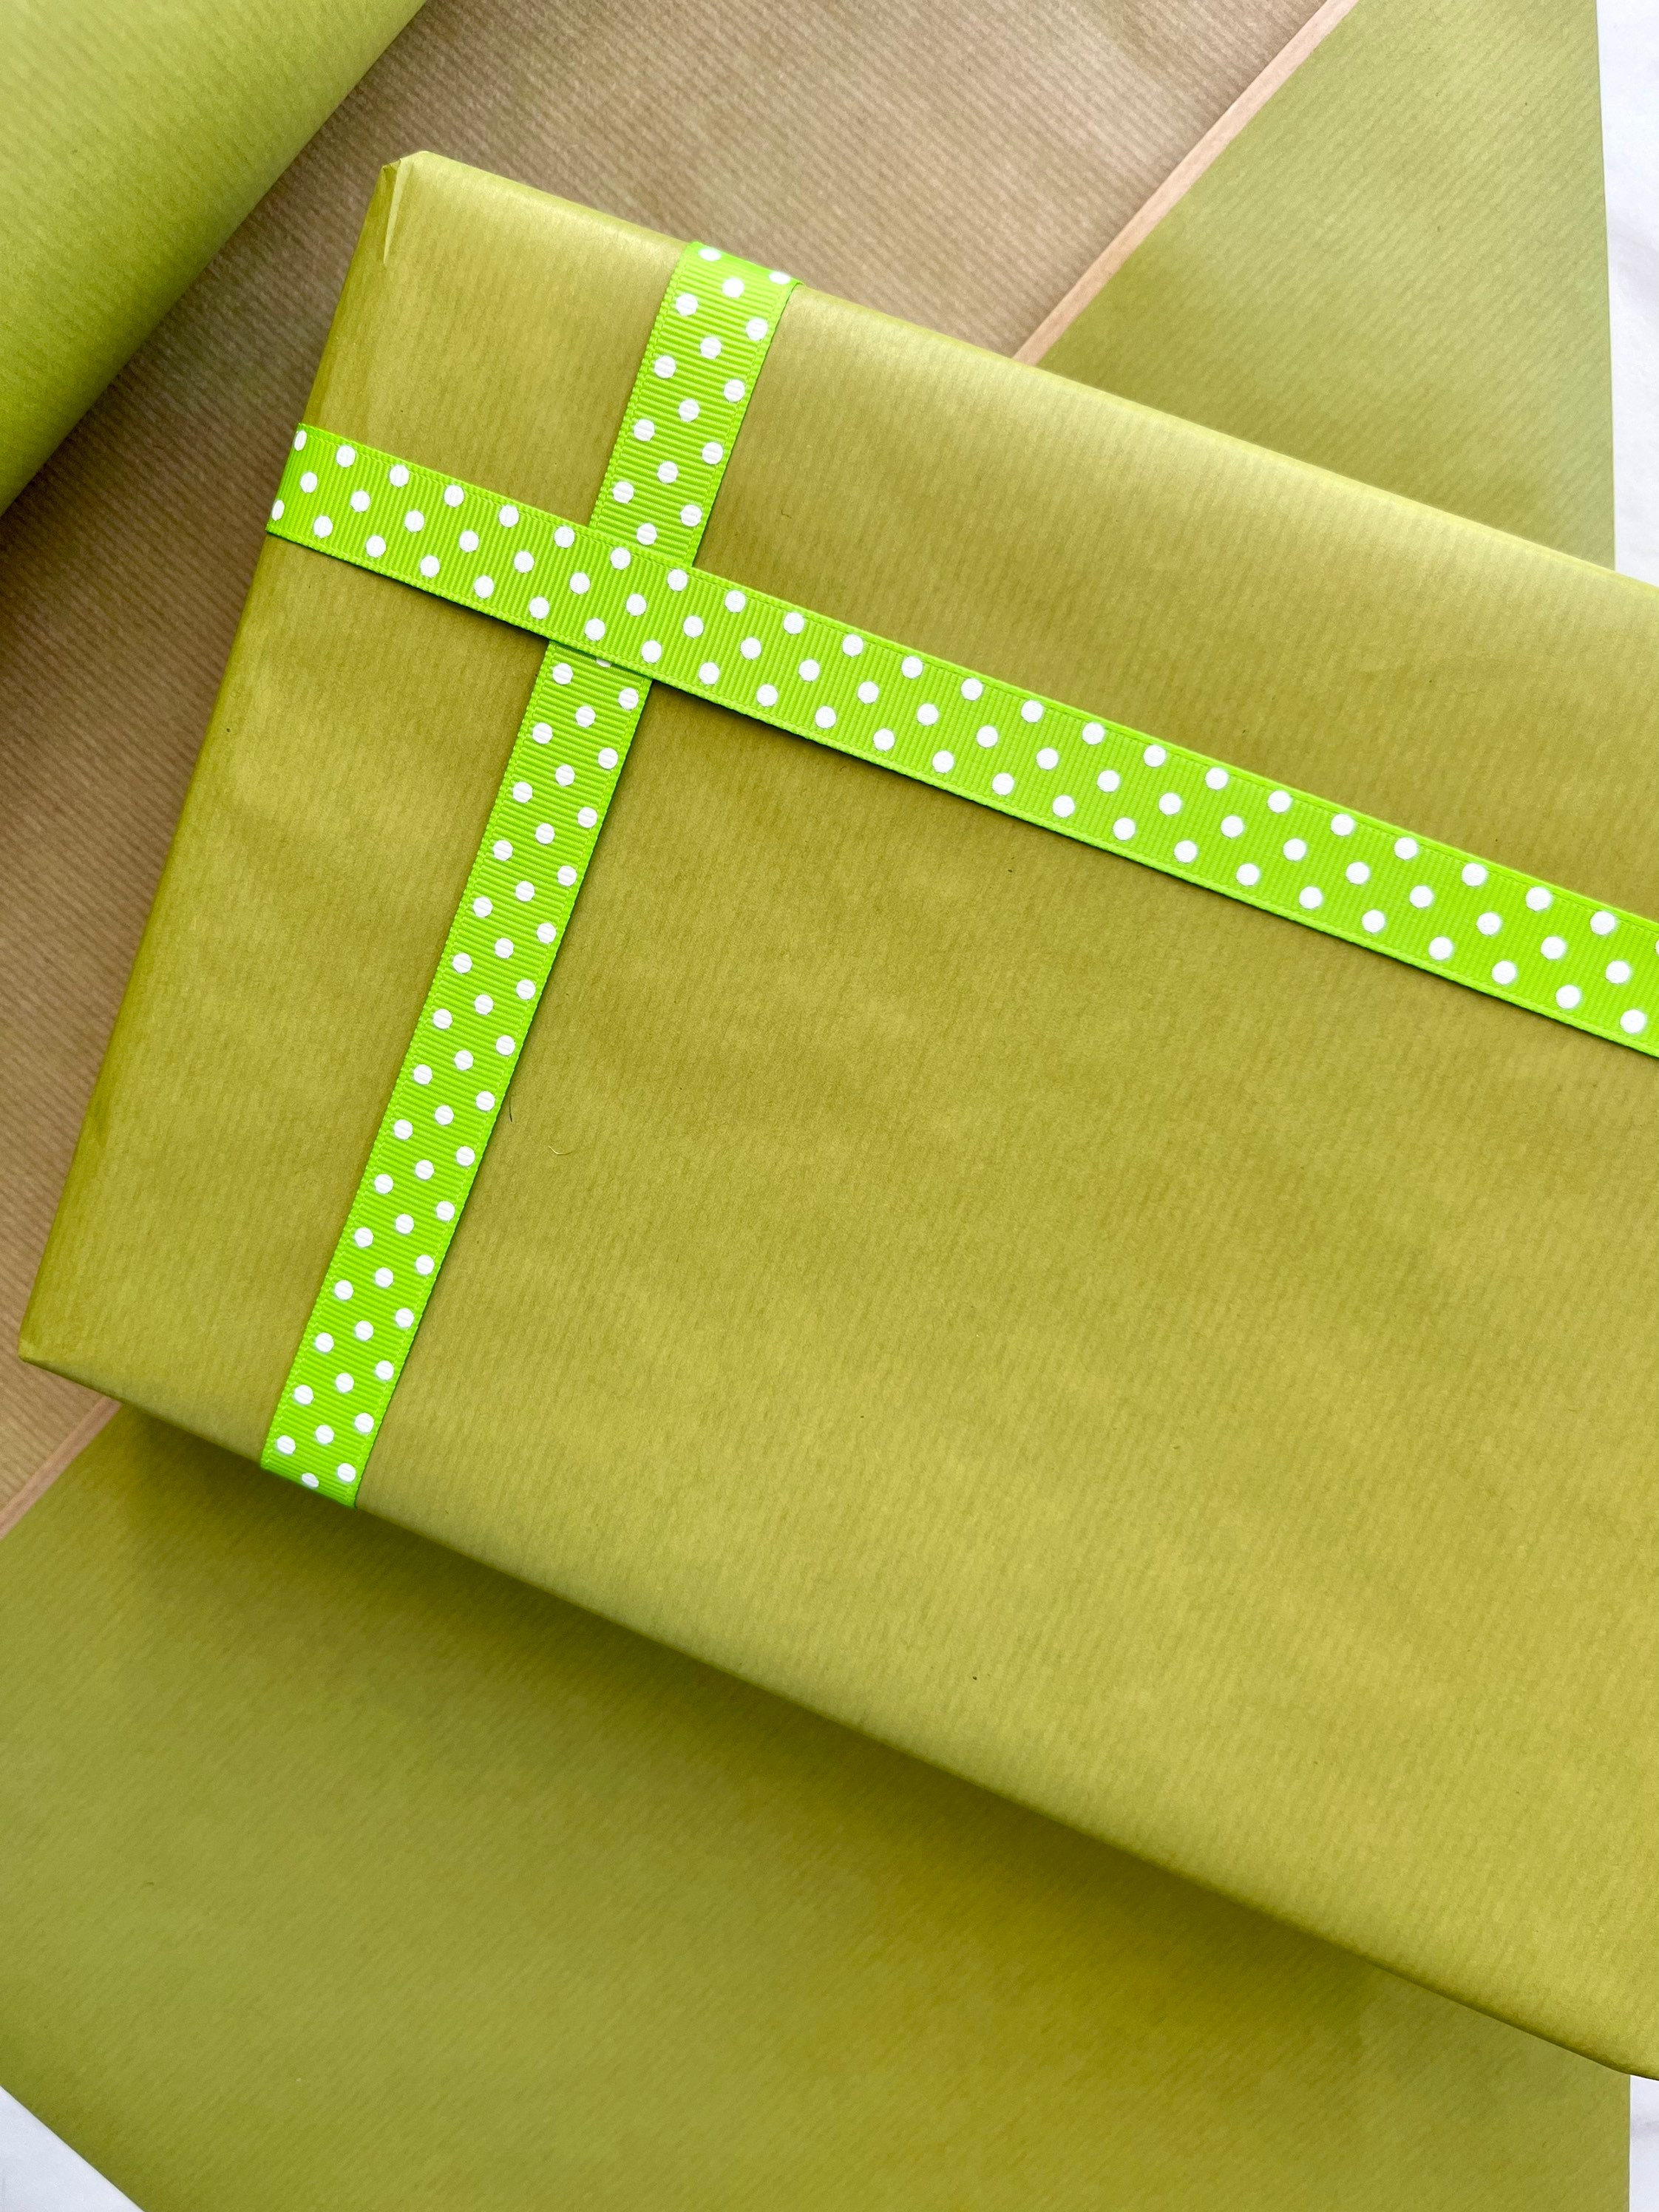 Olive Green Christmas Gift Wrapping Paper, 100% Recycled & Recyclable, Eco  Friendly Kraft Paper, Birthday, Anniversary Gift Wrap Roll/folded 